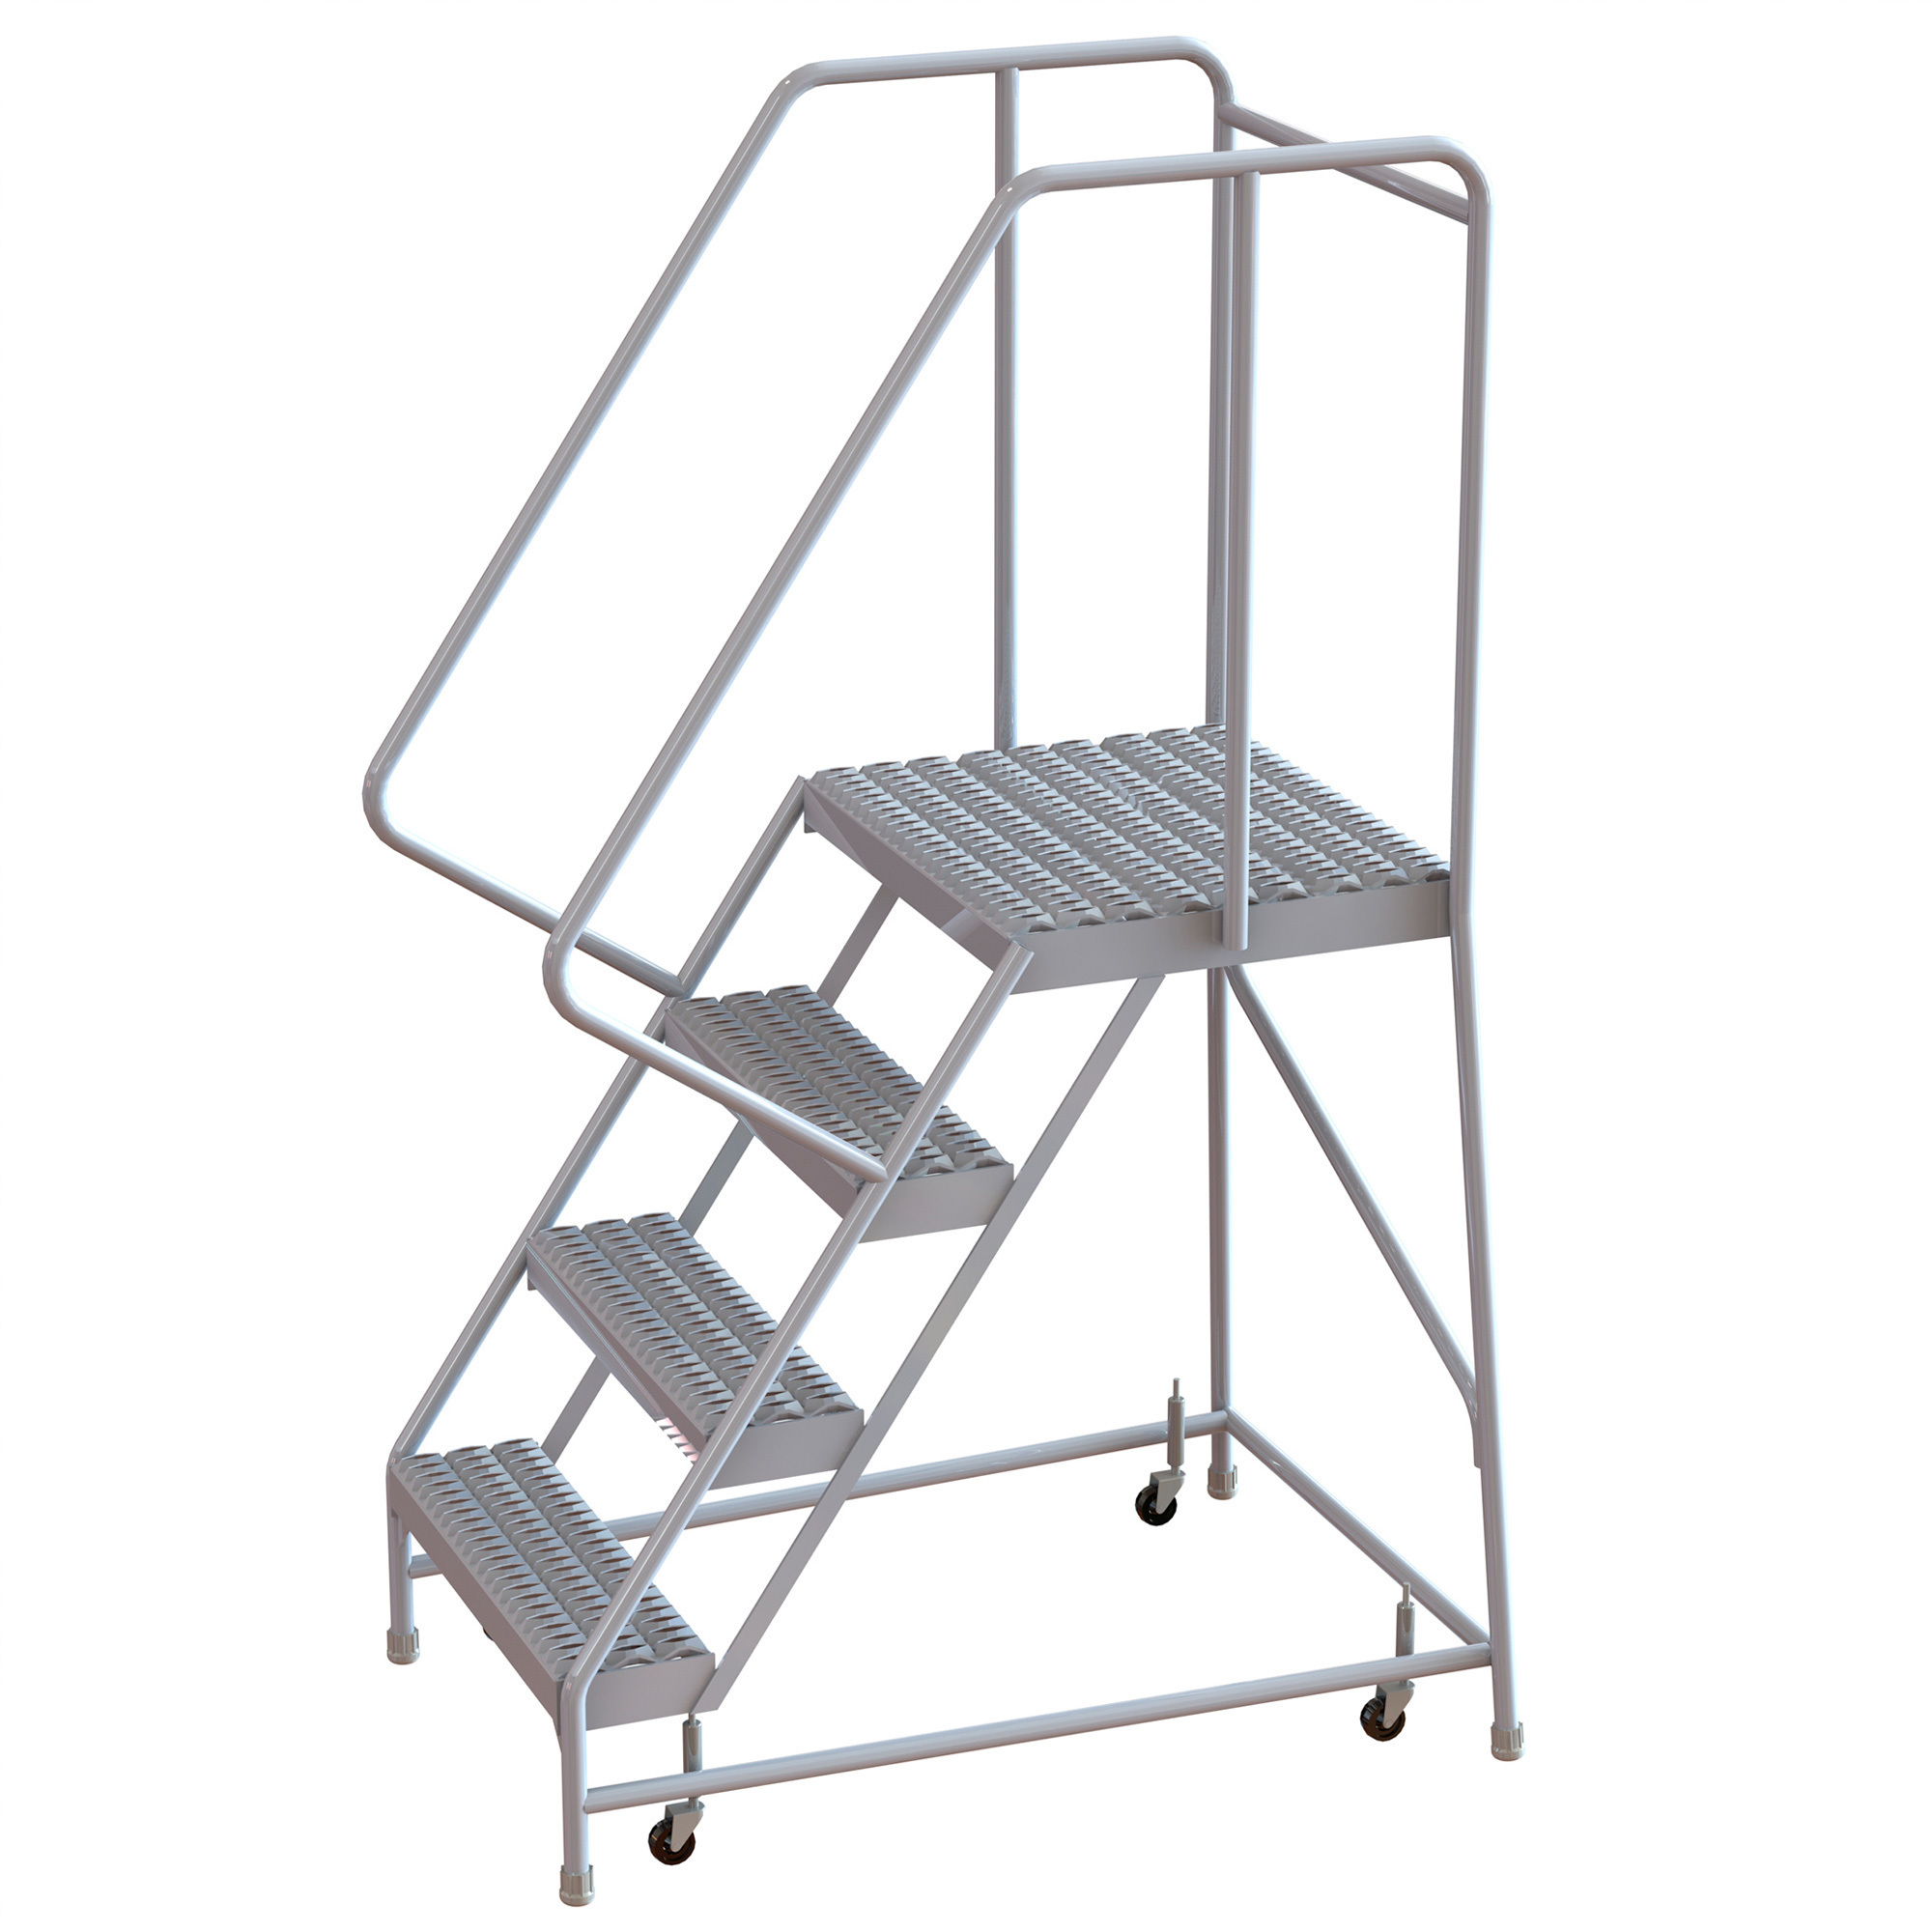 Tri-Arc 4-Step Aluminum Rolling Ladder with Serrated Steps and Spring-Loaded Casters â 24Inch W x 21Inch D Platform, 350-Lb. Capacity, Model